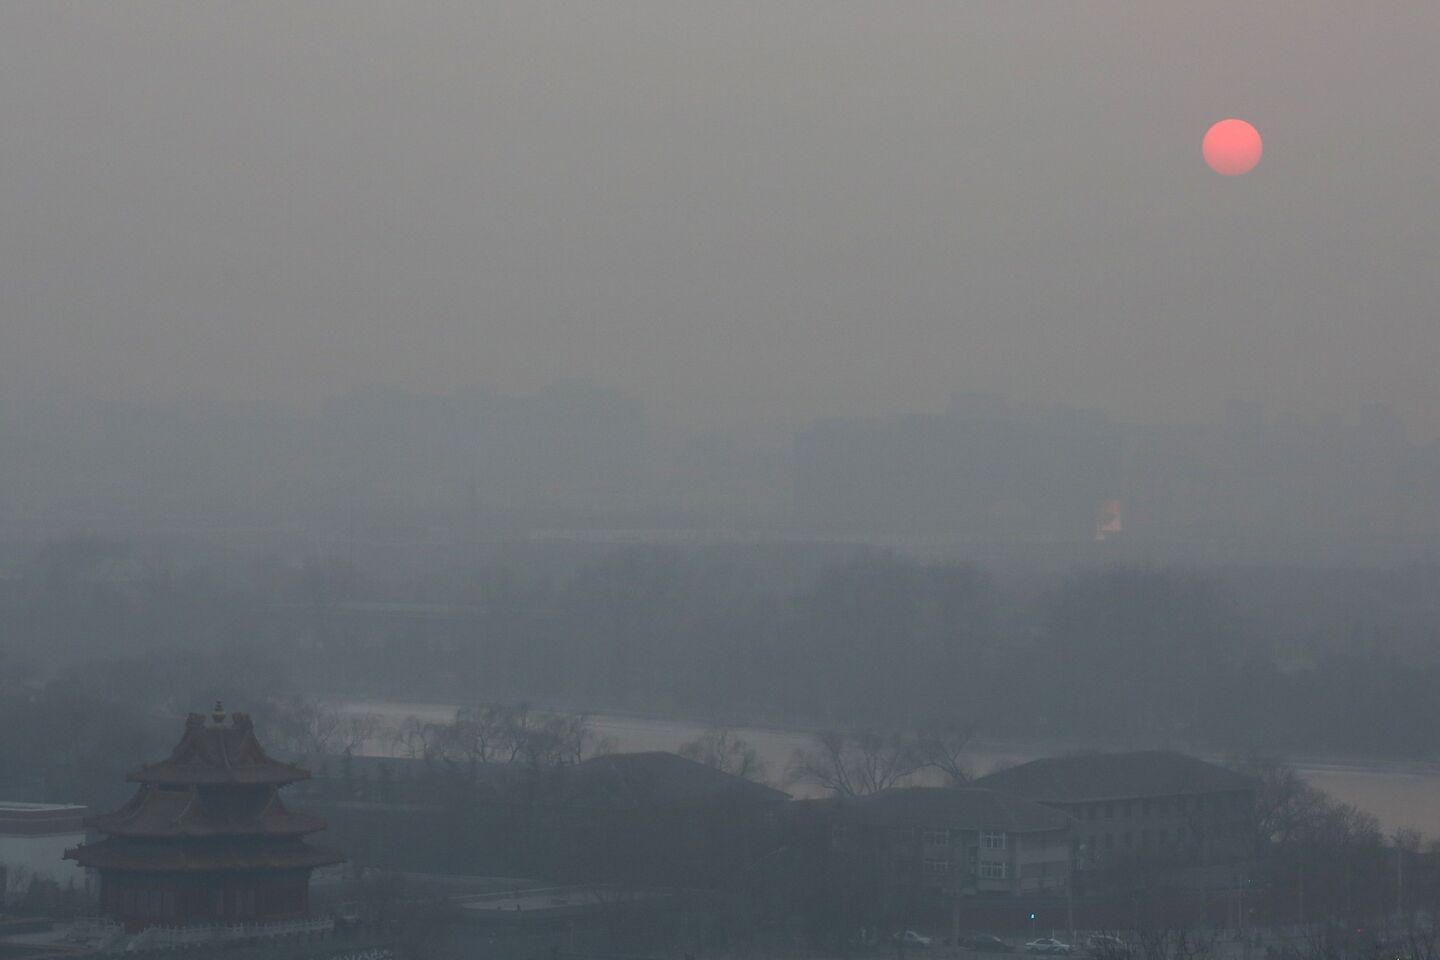 Air pollution over Beijing